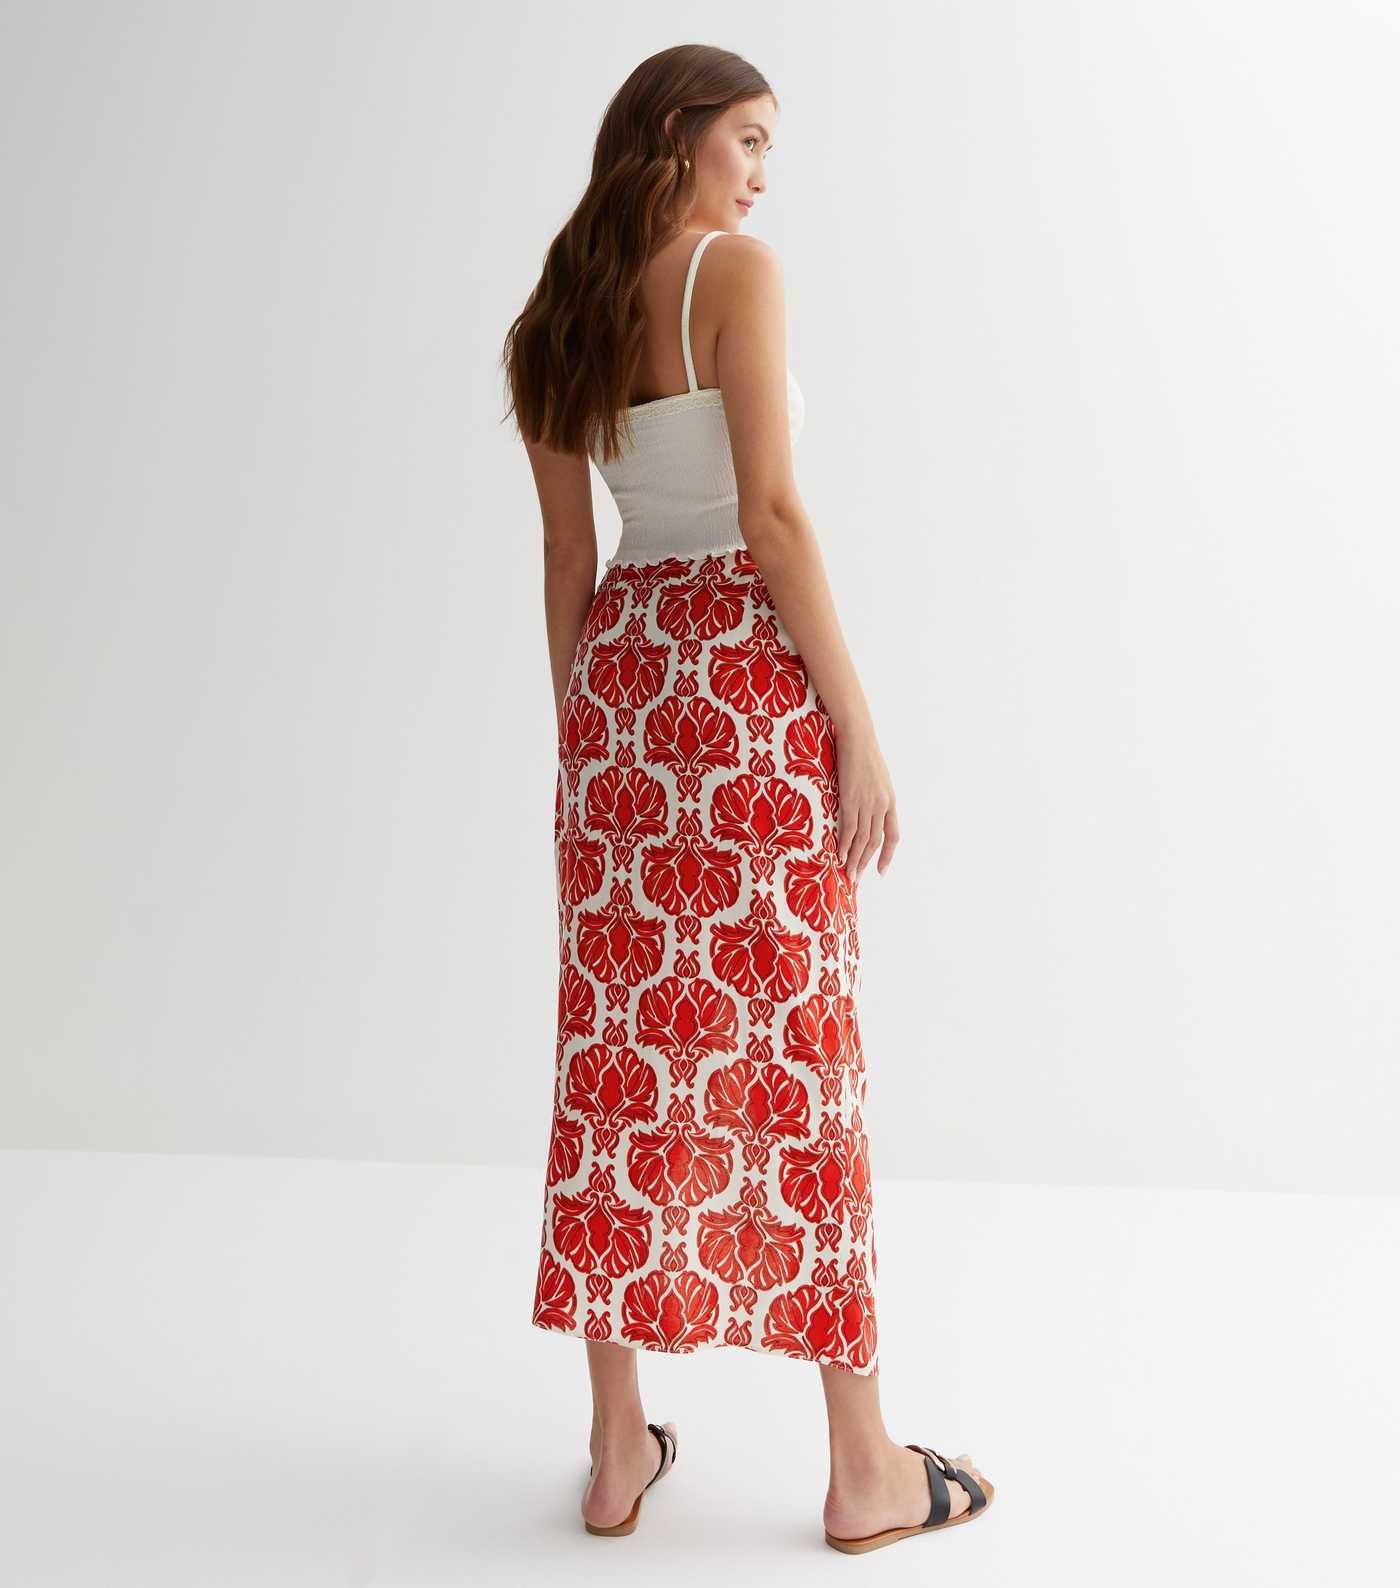 Red Tile Print Twist Front Midi Skirt
						
						Add to Saved Items
						Remove from Saved Ite... | New Look (UK)